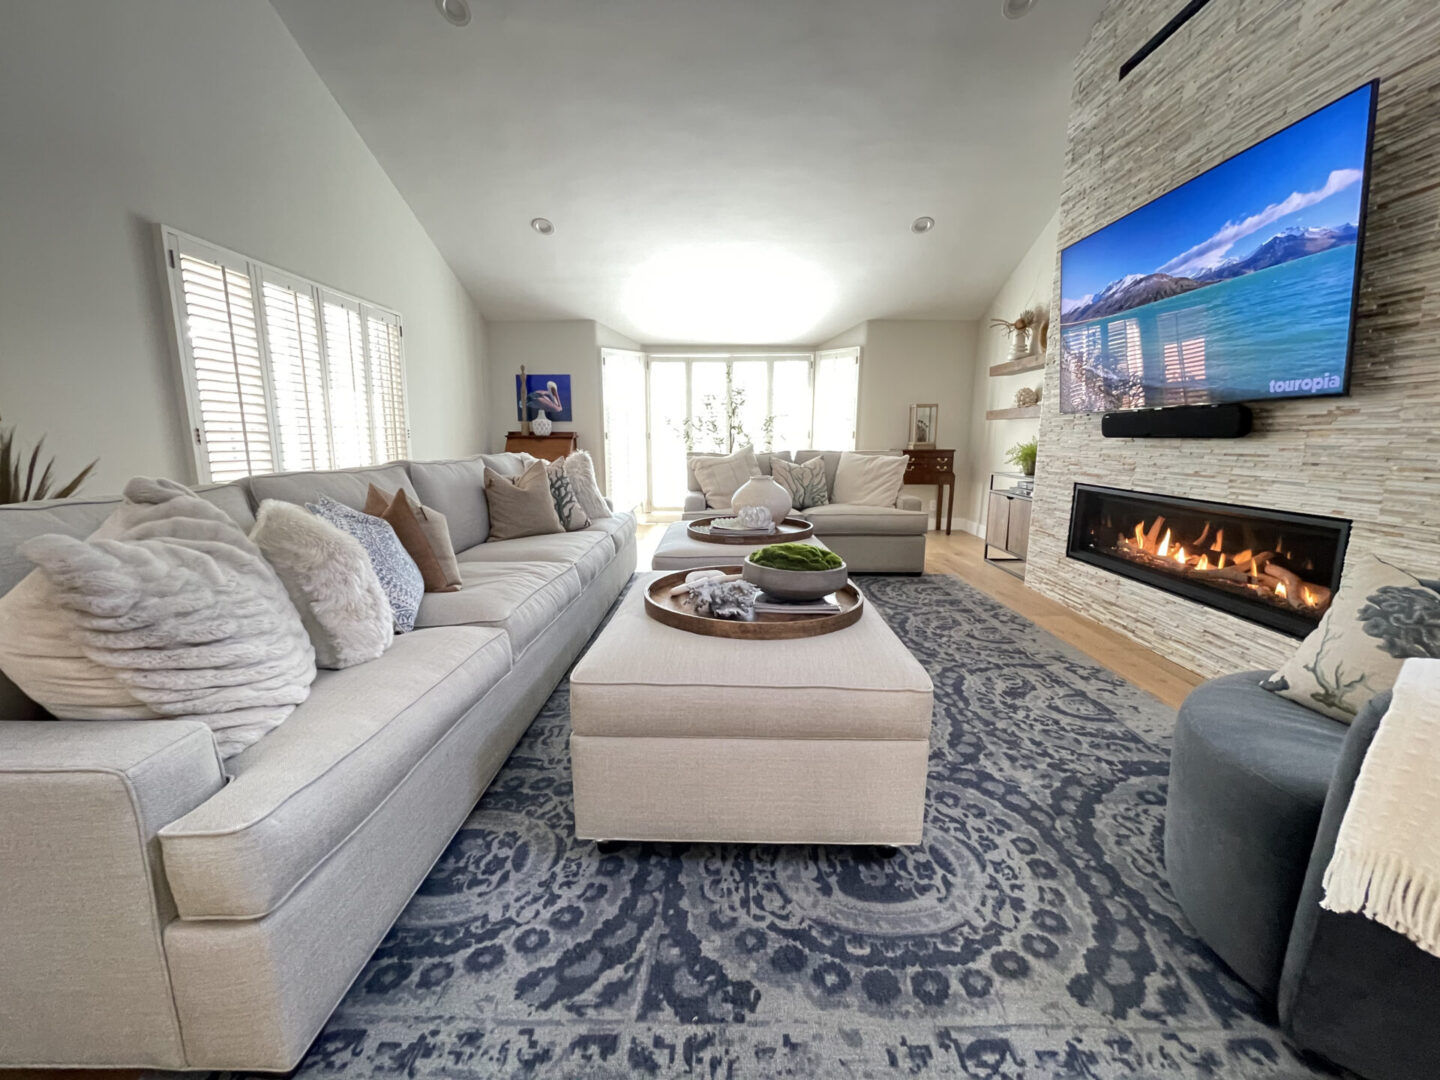 A beautiful living room of a house with a big size television